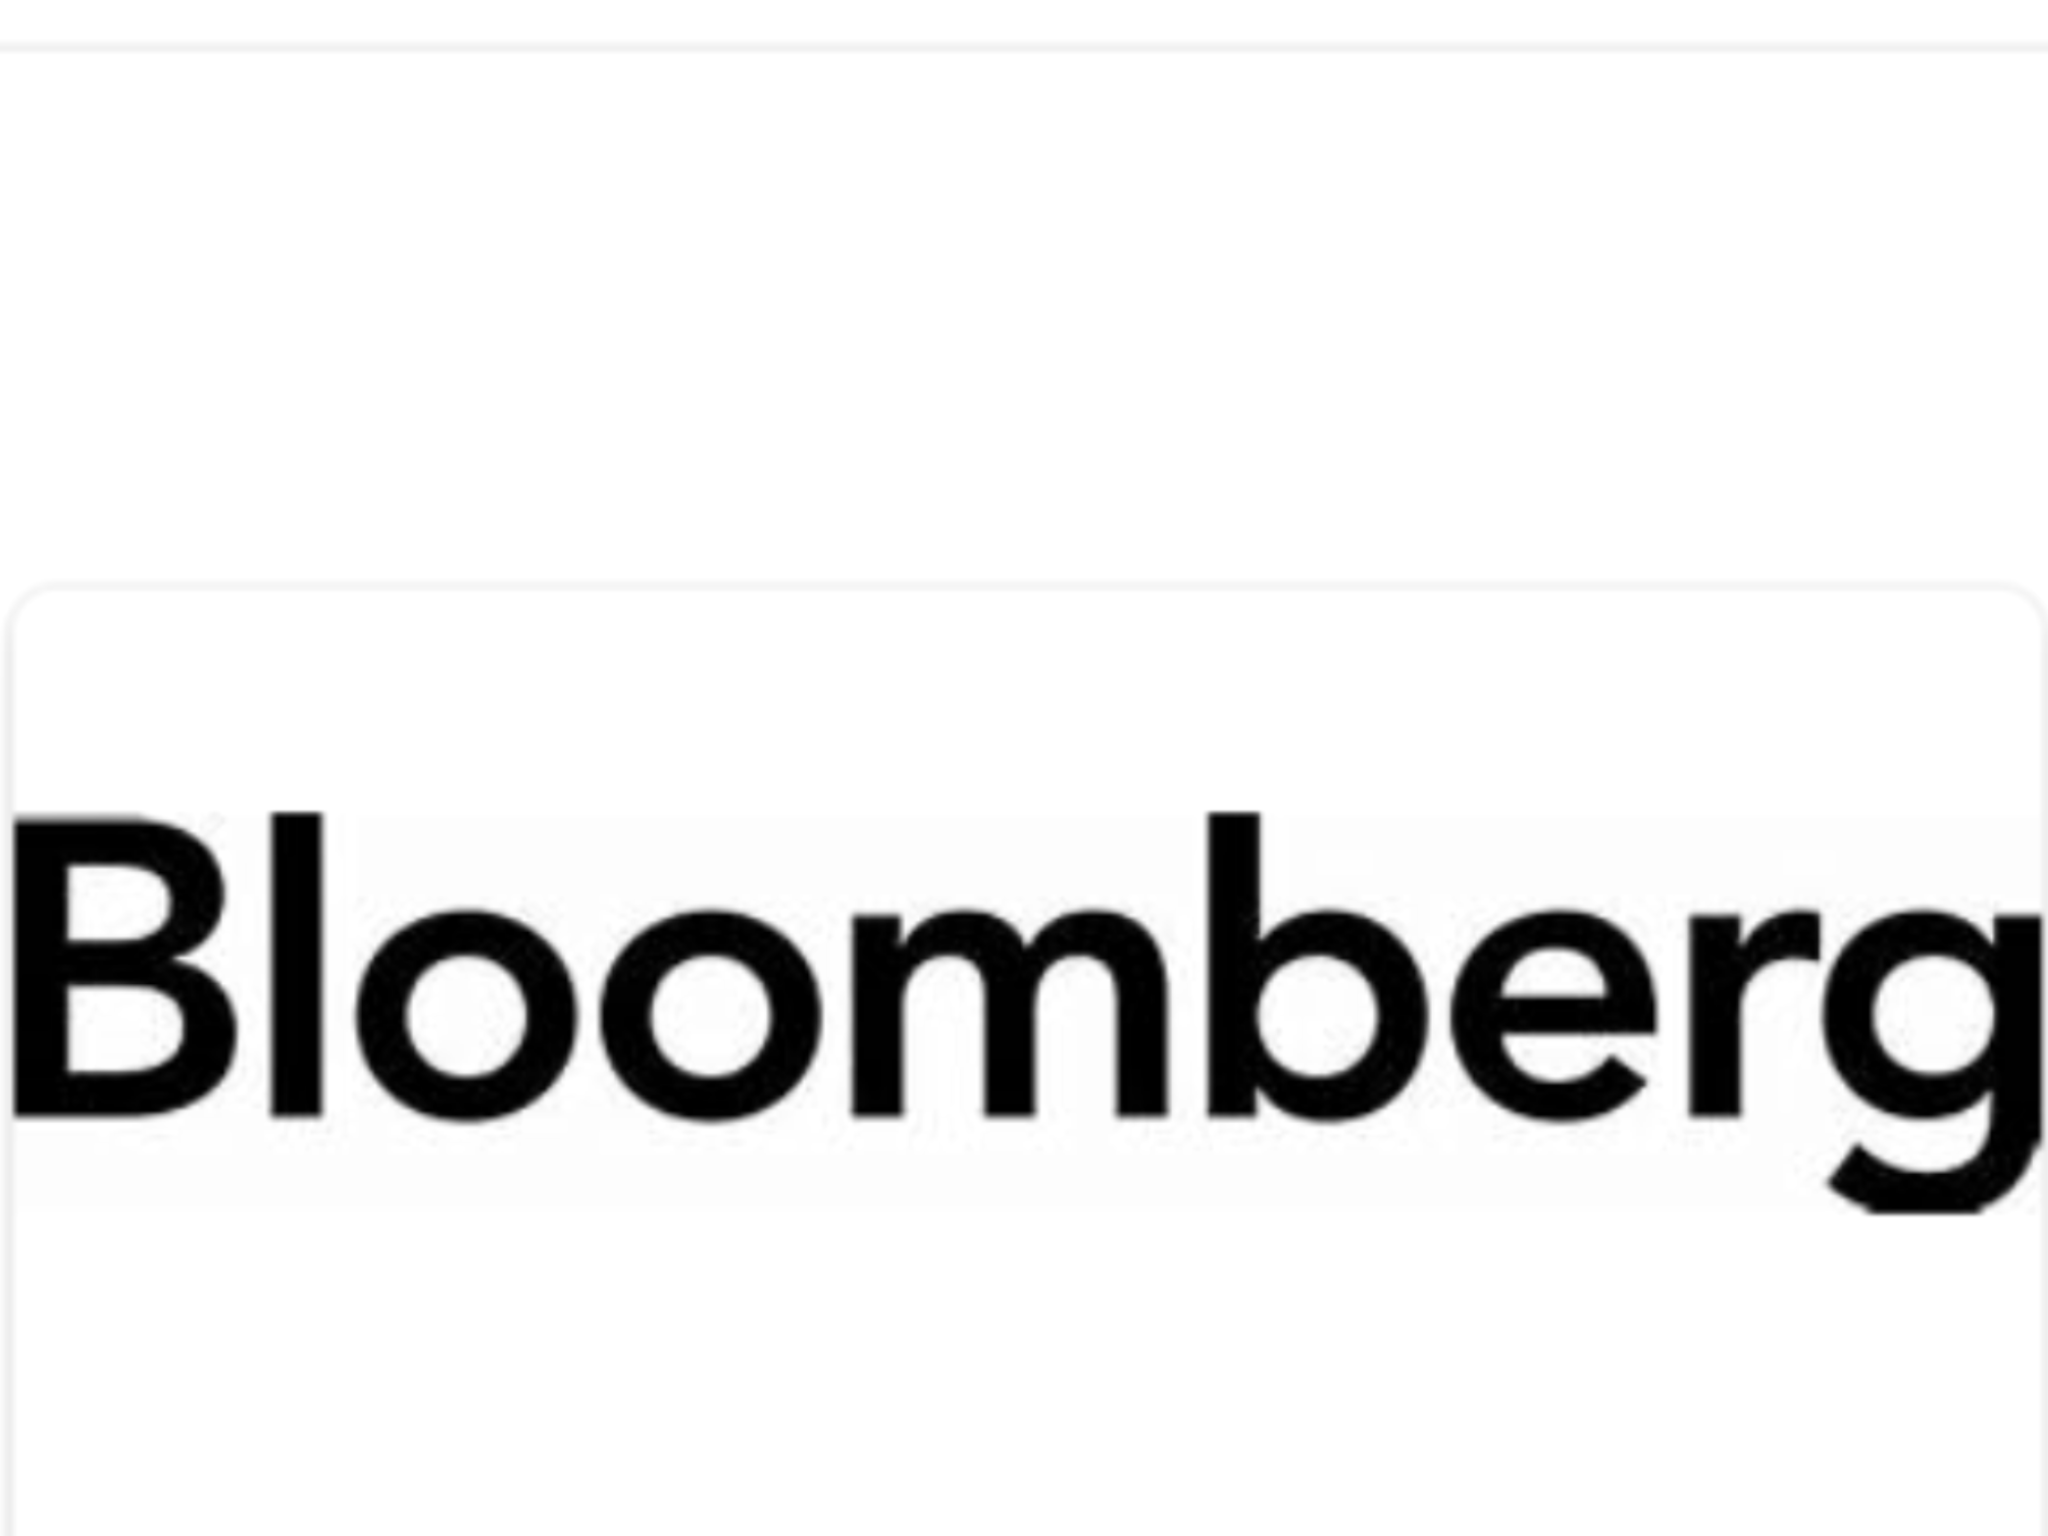 Go to Bing and type in BLOOMBERG RIPOFF